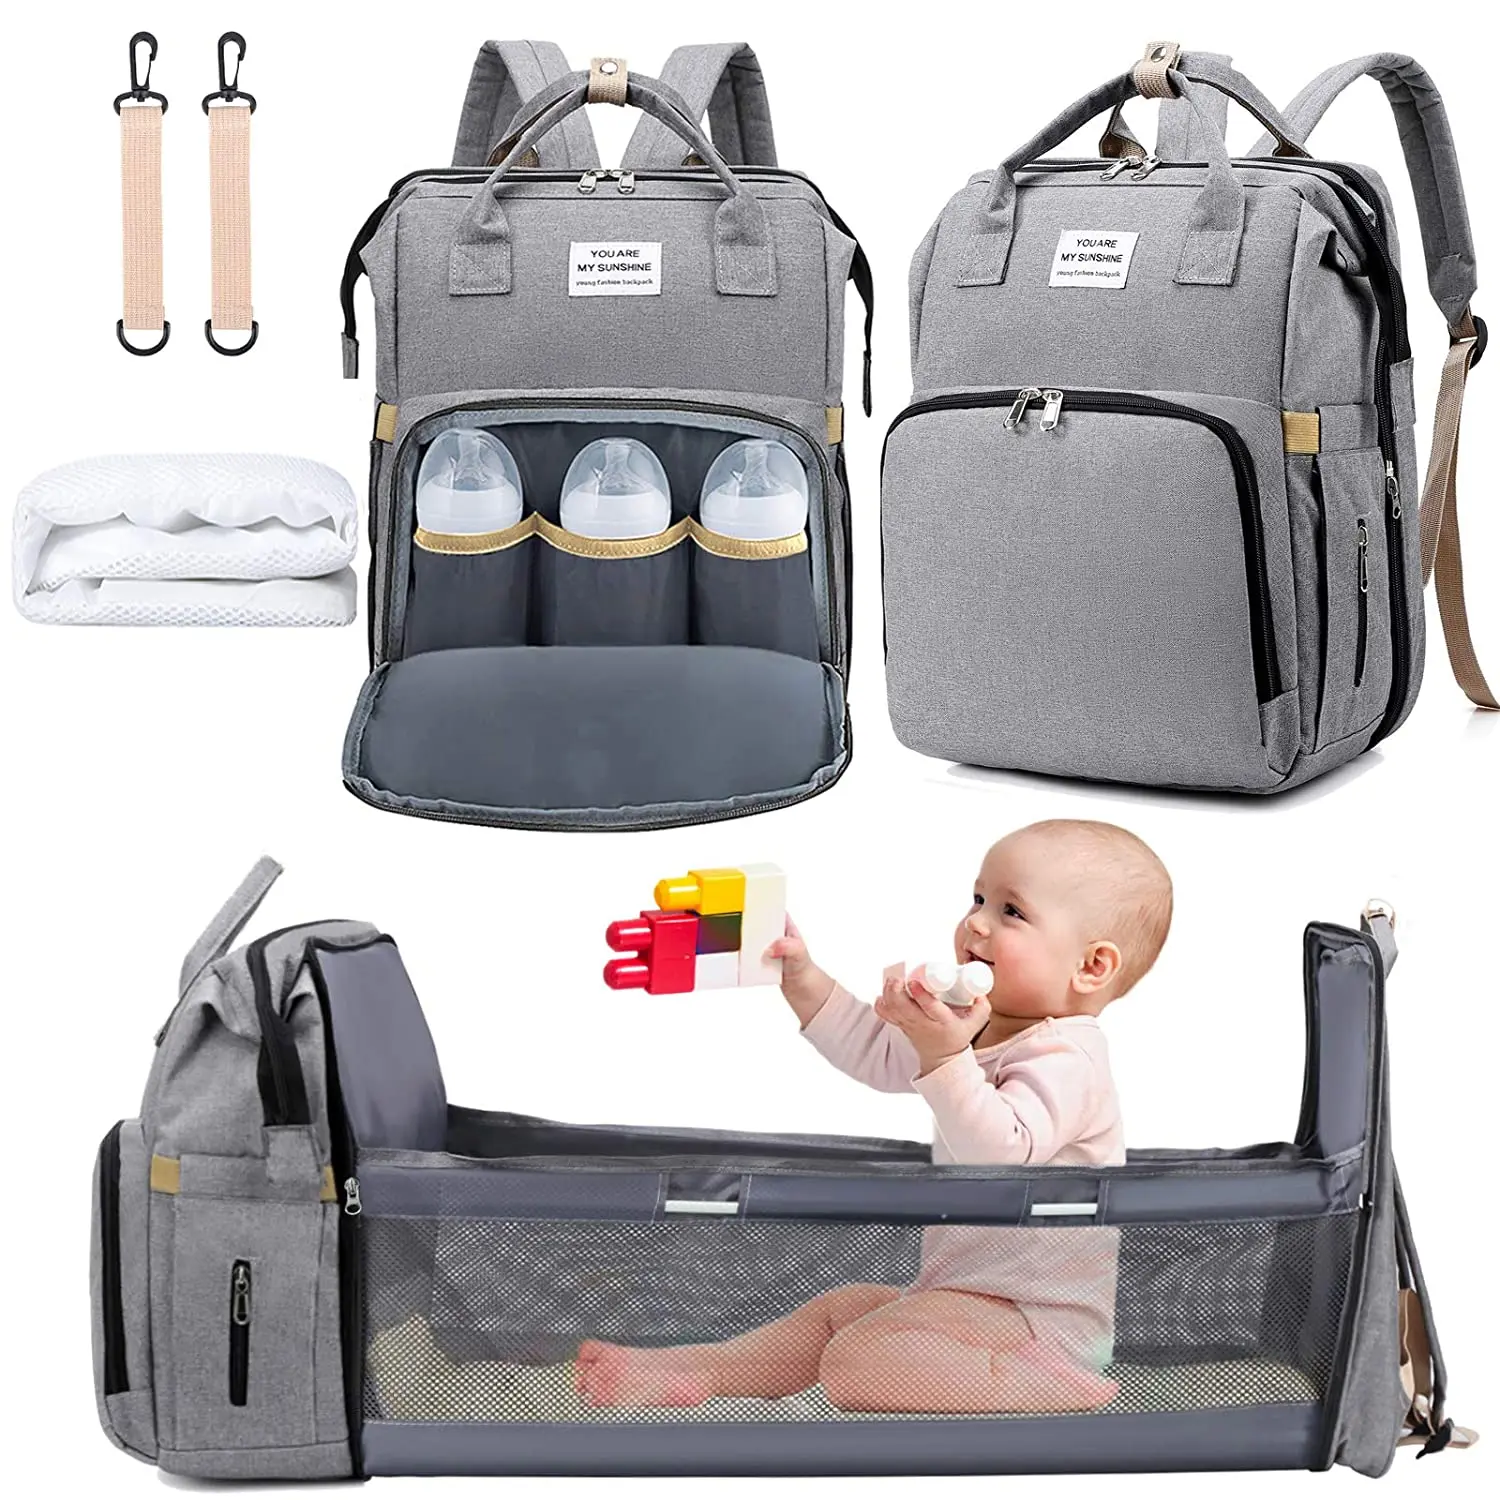 

Amazon Hot Selling 3 in 1 Mom Travel Backpack Folding Crib Baby Nappy Diaper Bags With Changing Station, Customized colors